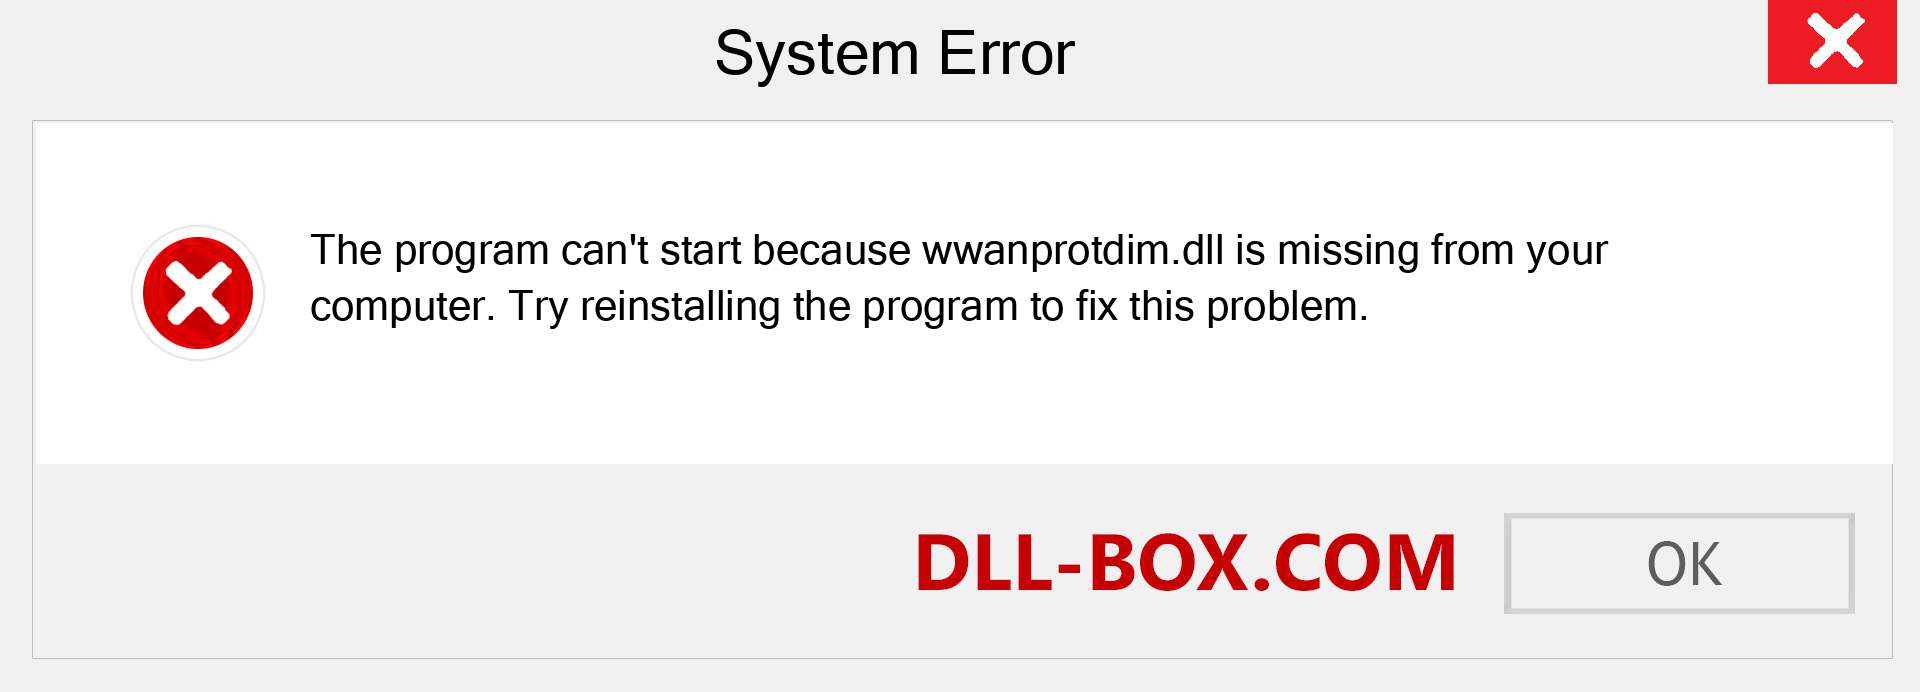  wwanprotdim.dll file is missing?. Download for Windows 7, 8, 10 - Fix  wwanprotdim dll Missing Error on Windows, photos, images